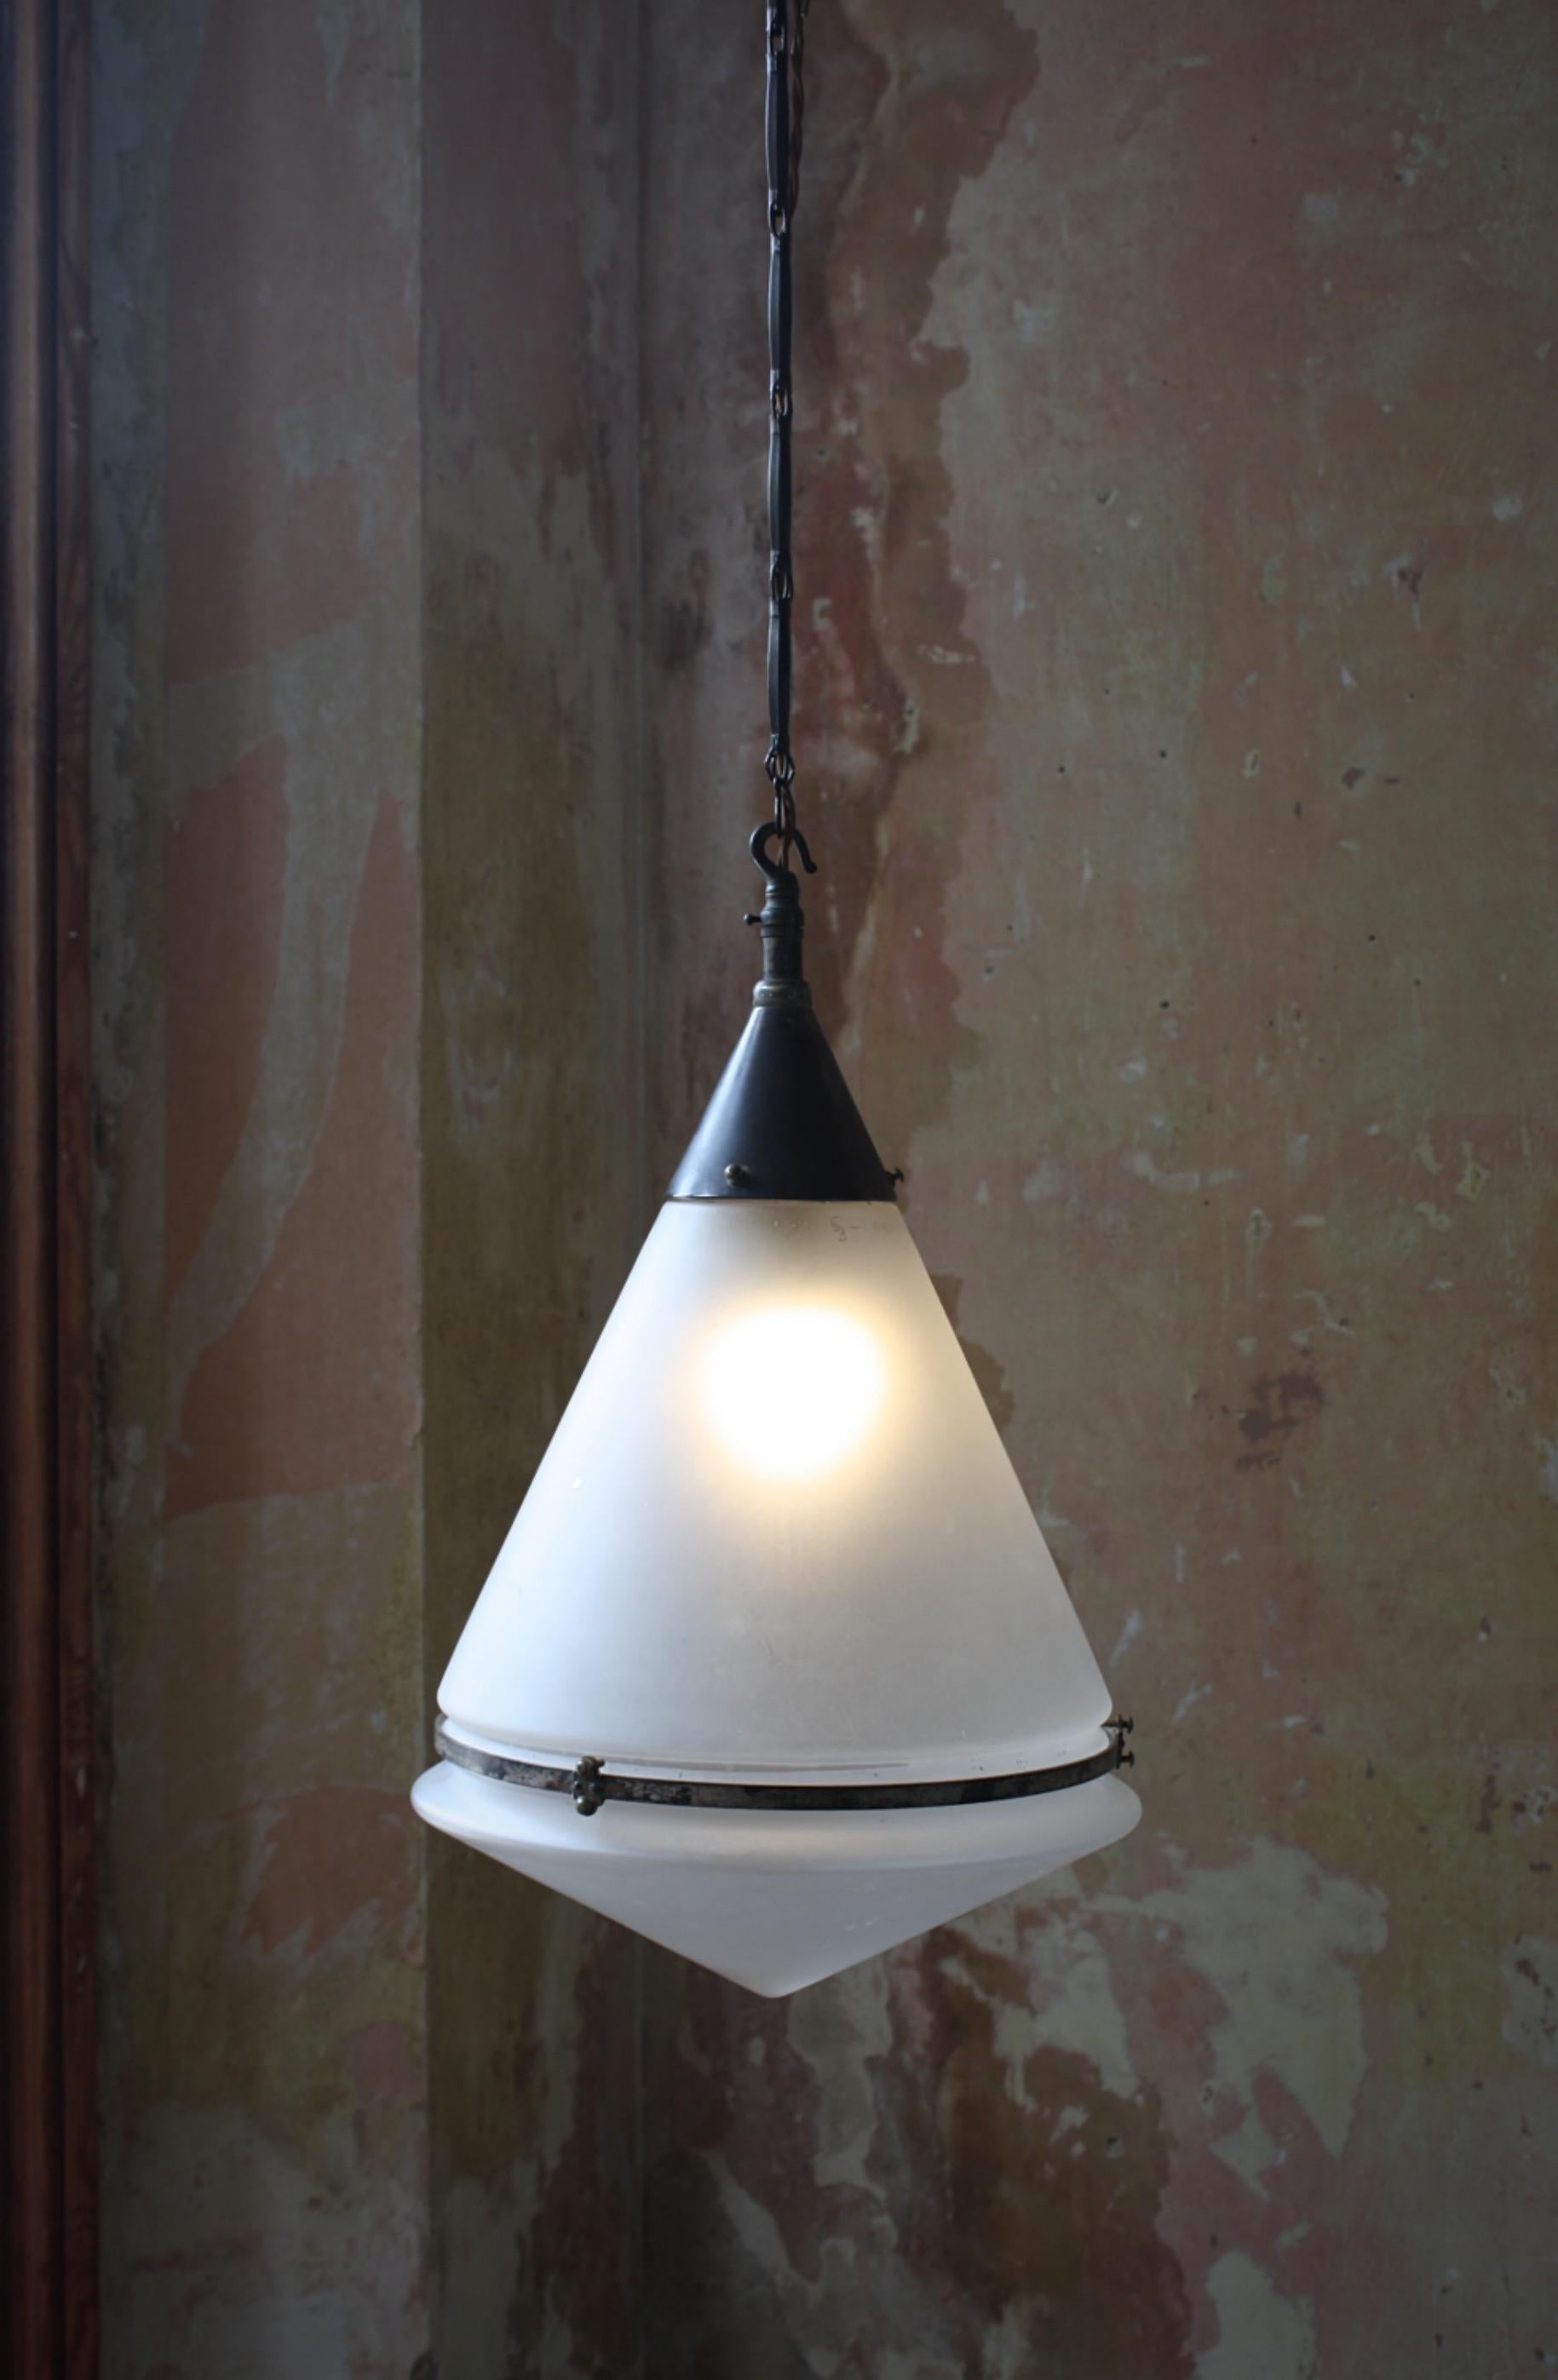 A rare and complete Peter Behrens conical pendant, with its original spun brass gallery central band and ceiling mount.

The lantern also has its factory issue pressed brass decorative chain that conceales the flex and a much large length than